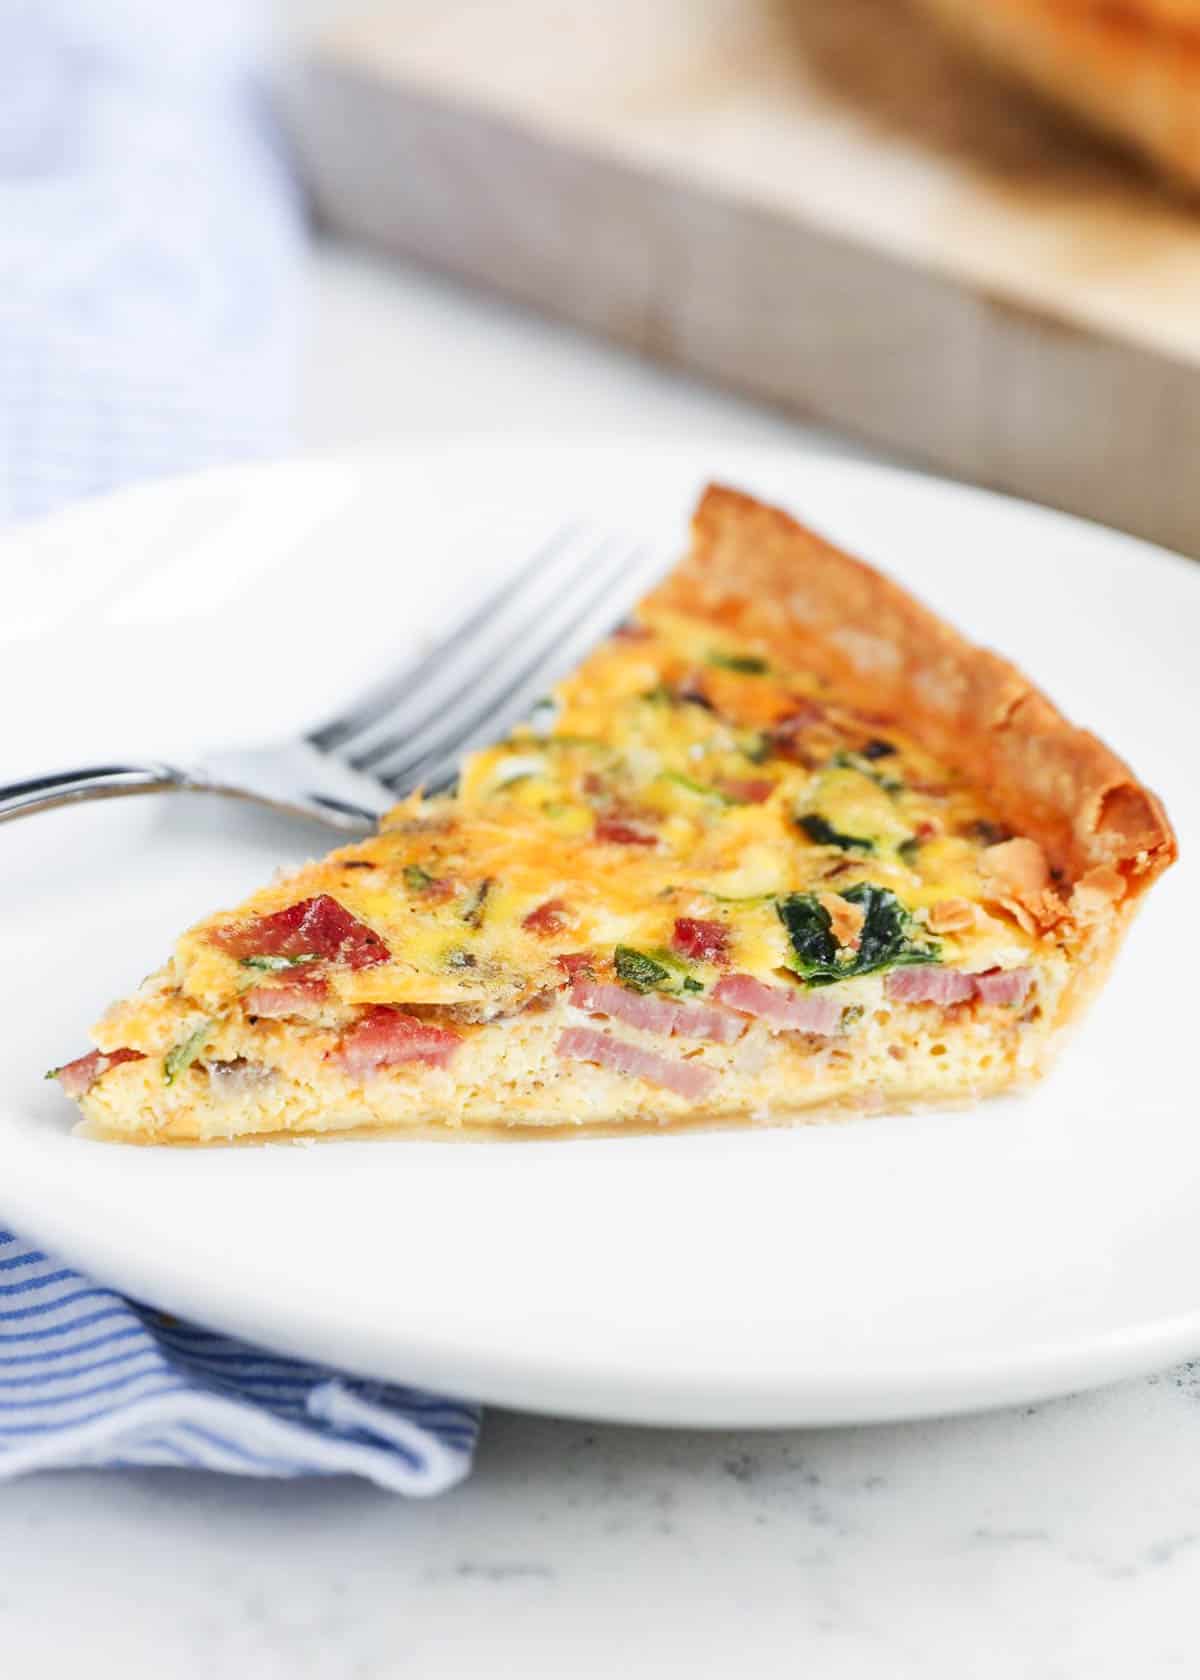 Slice of quiche on a white plate.